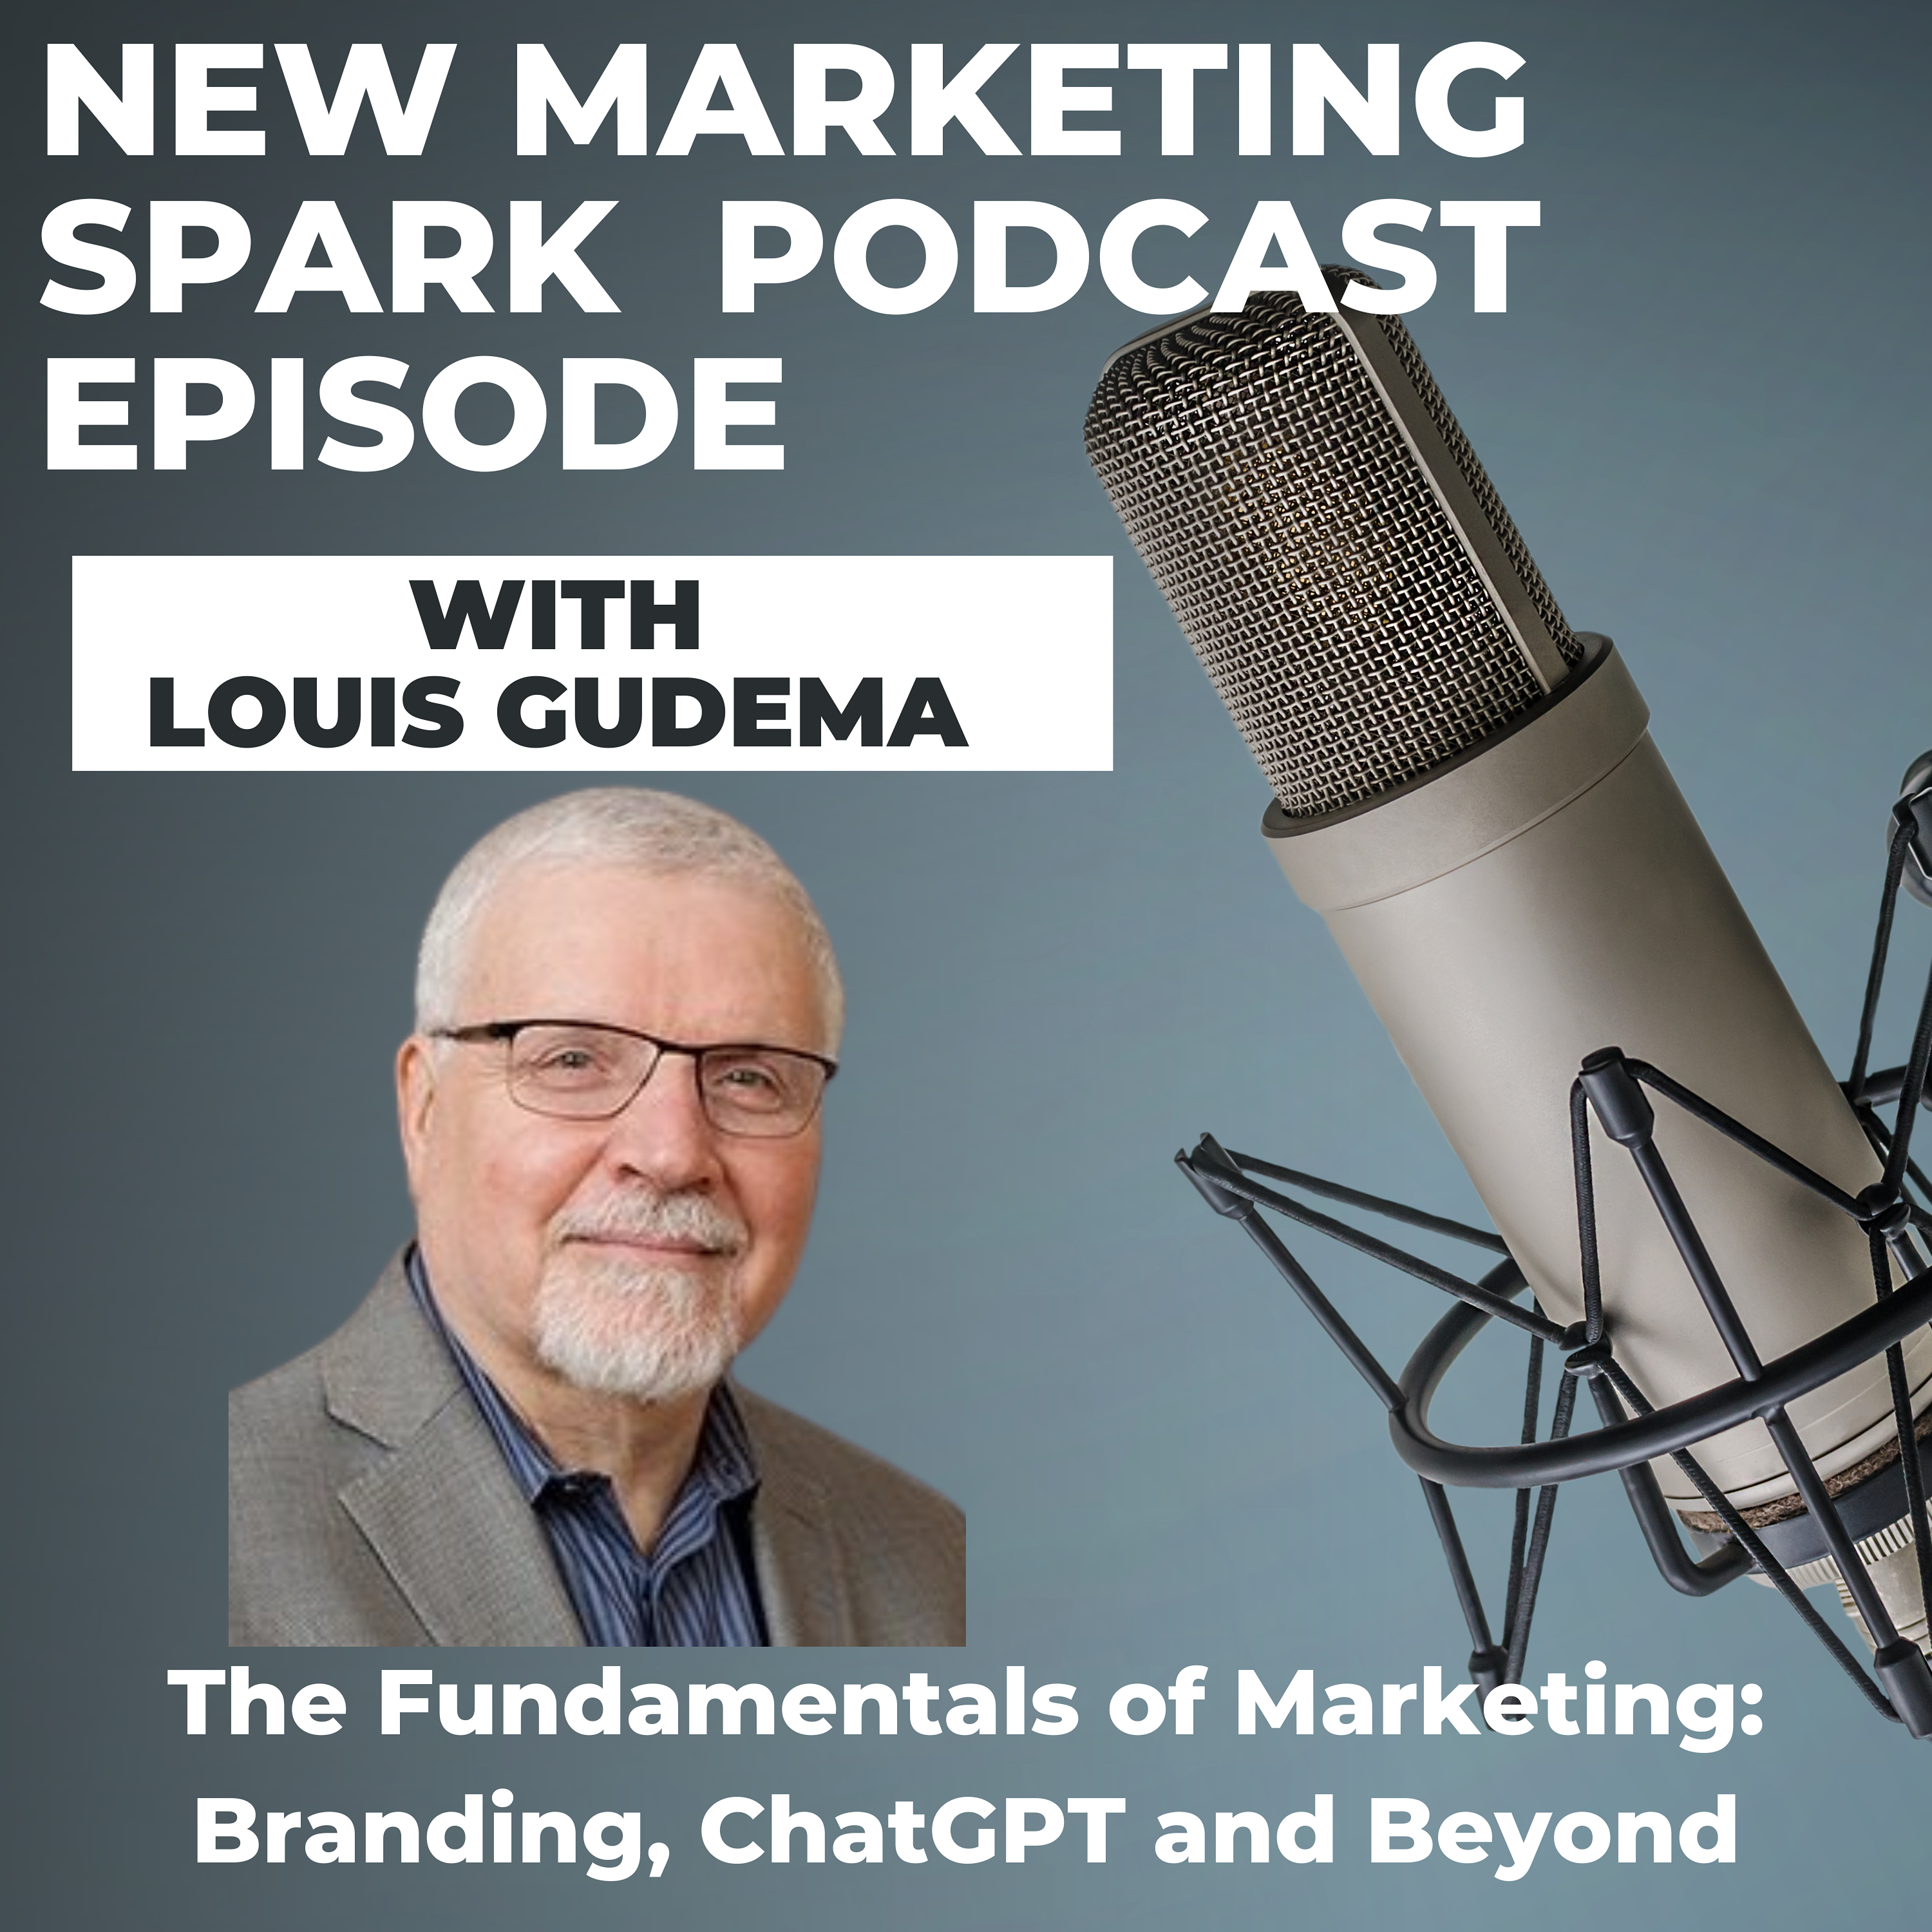 The Fundamentals of Marketing: Branding, ChatGPT and Beyond